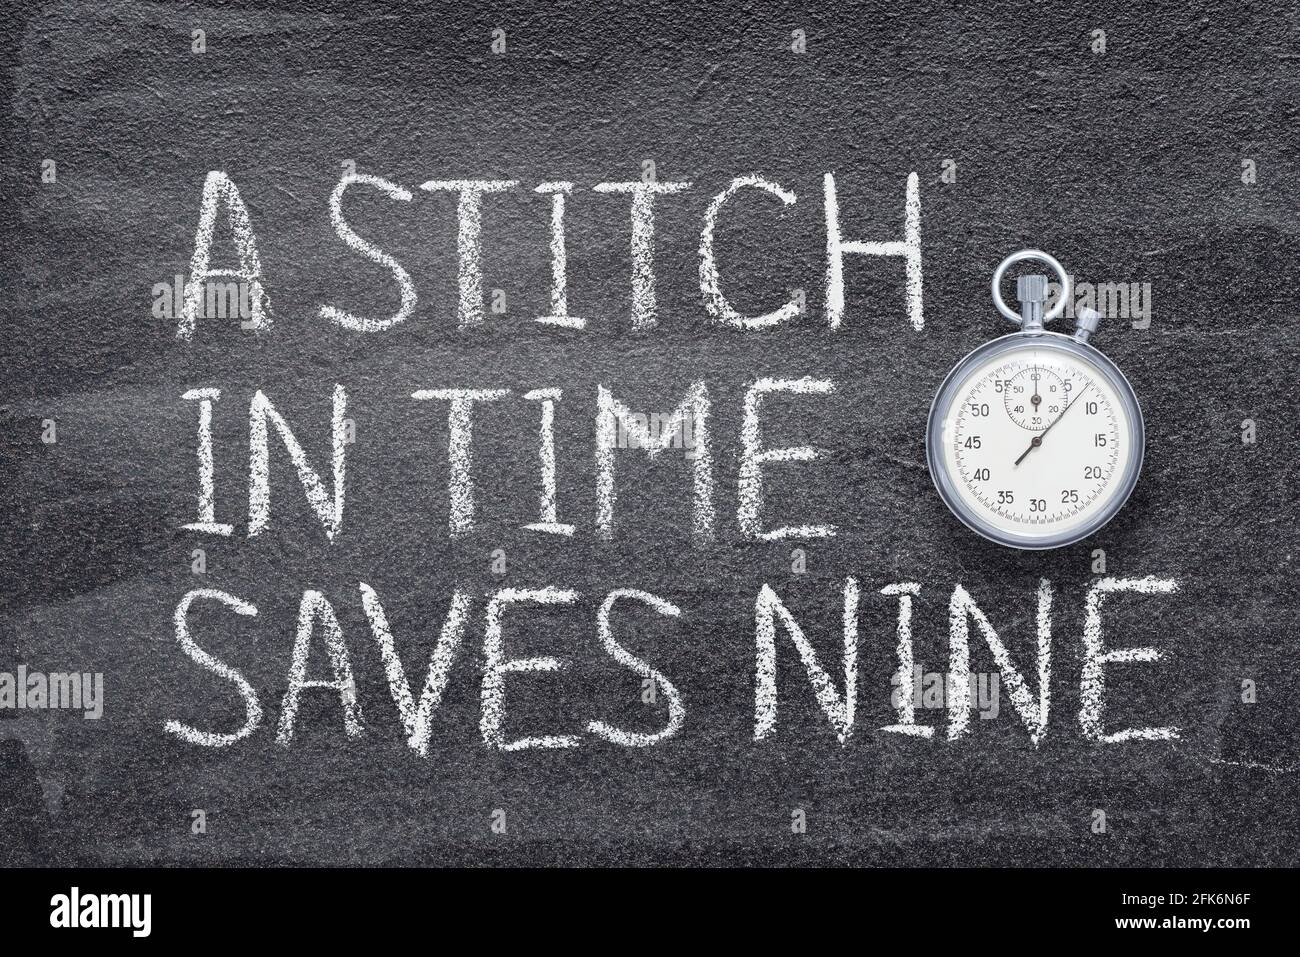 A stitch in time saves nine saying written on chalkboard with vintage precise stopwatch Stock Photo